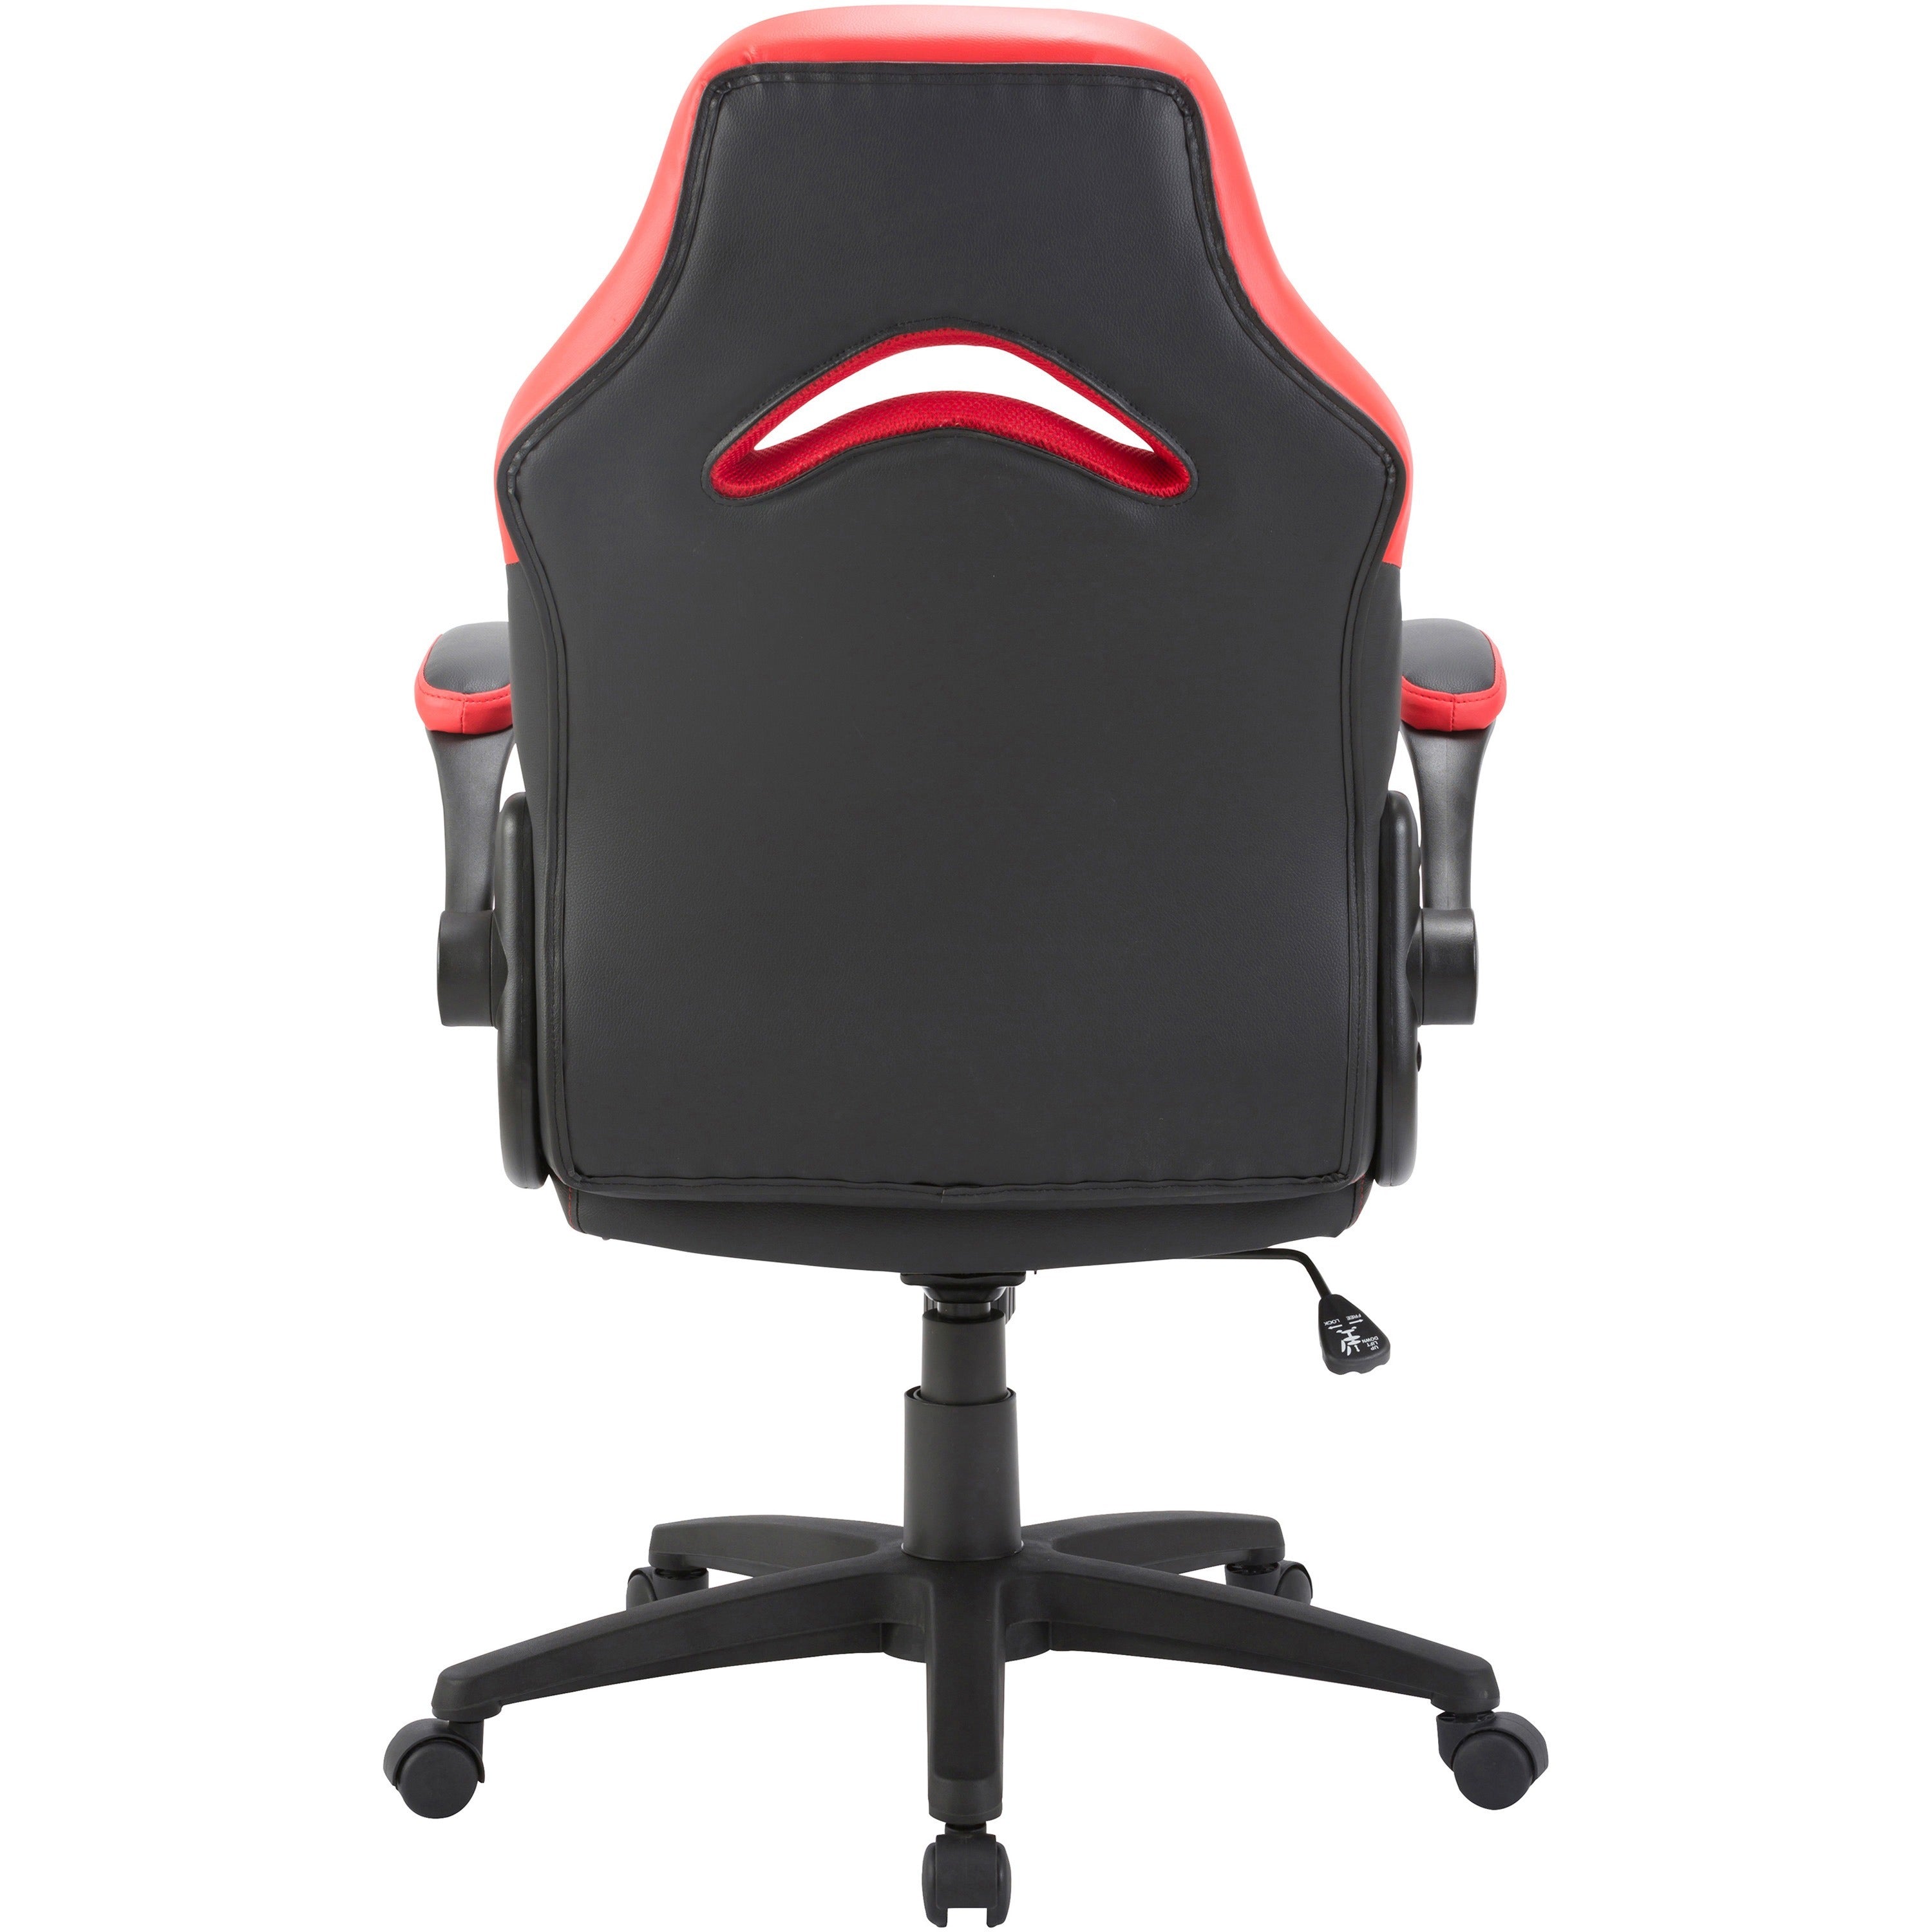 lorell-bucket-seat-high-back-gaming-chair-red-black-seat-red-black-back-5-star-base-28-length-x-205-width-x-475-height_llr84387 - 5